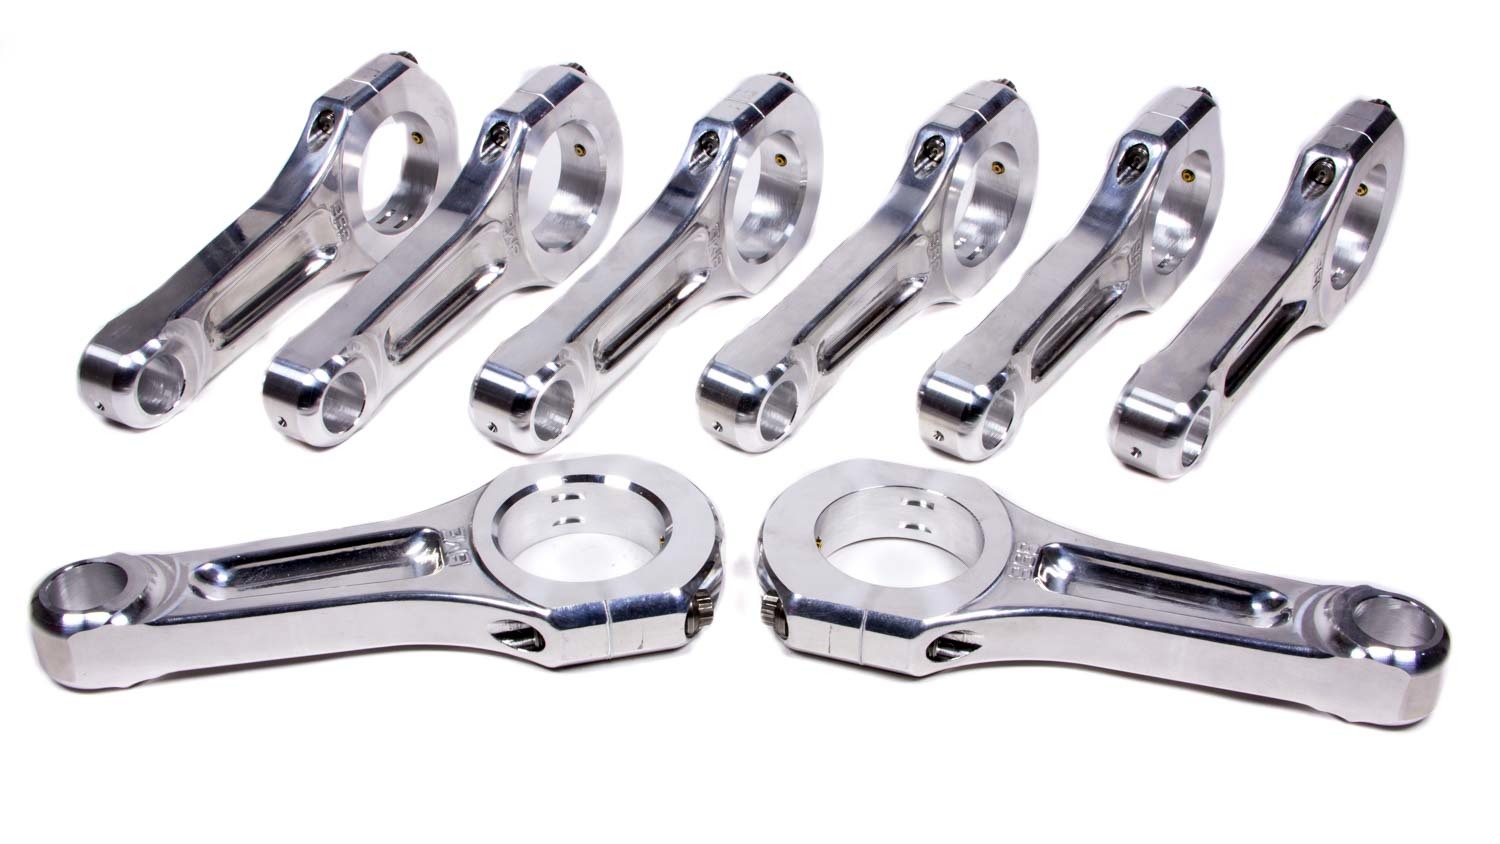 Bill Miller 396665 - Connecting Rod, I Beam, 6.800 in Long, Bushed, 7/16 in Cap Screws, Forged Aluminum, Big Block Chevy, Set of 8